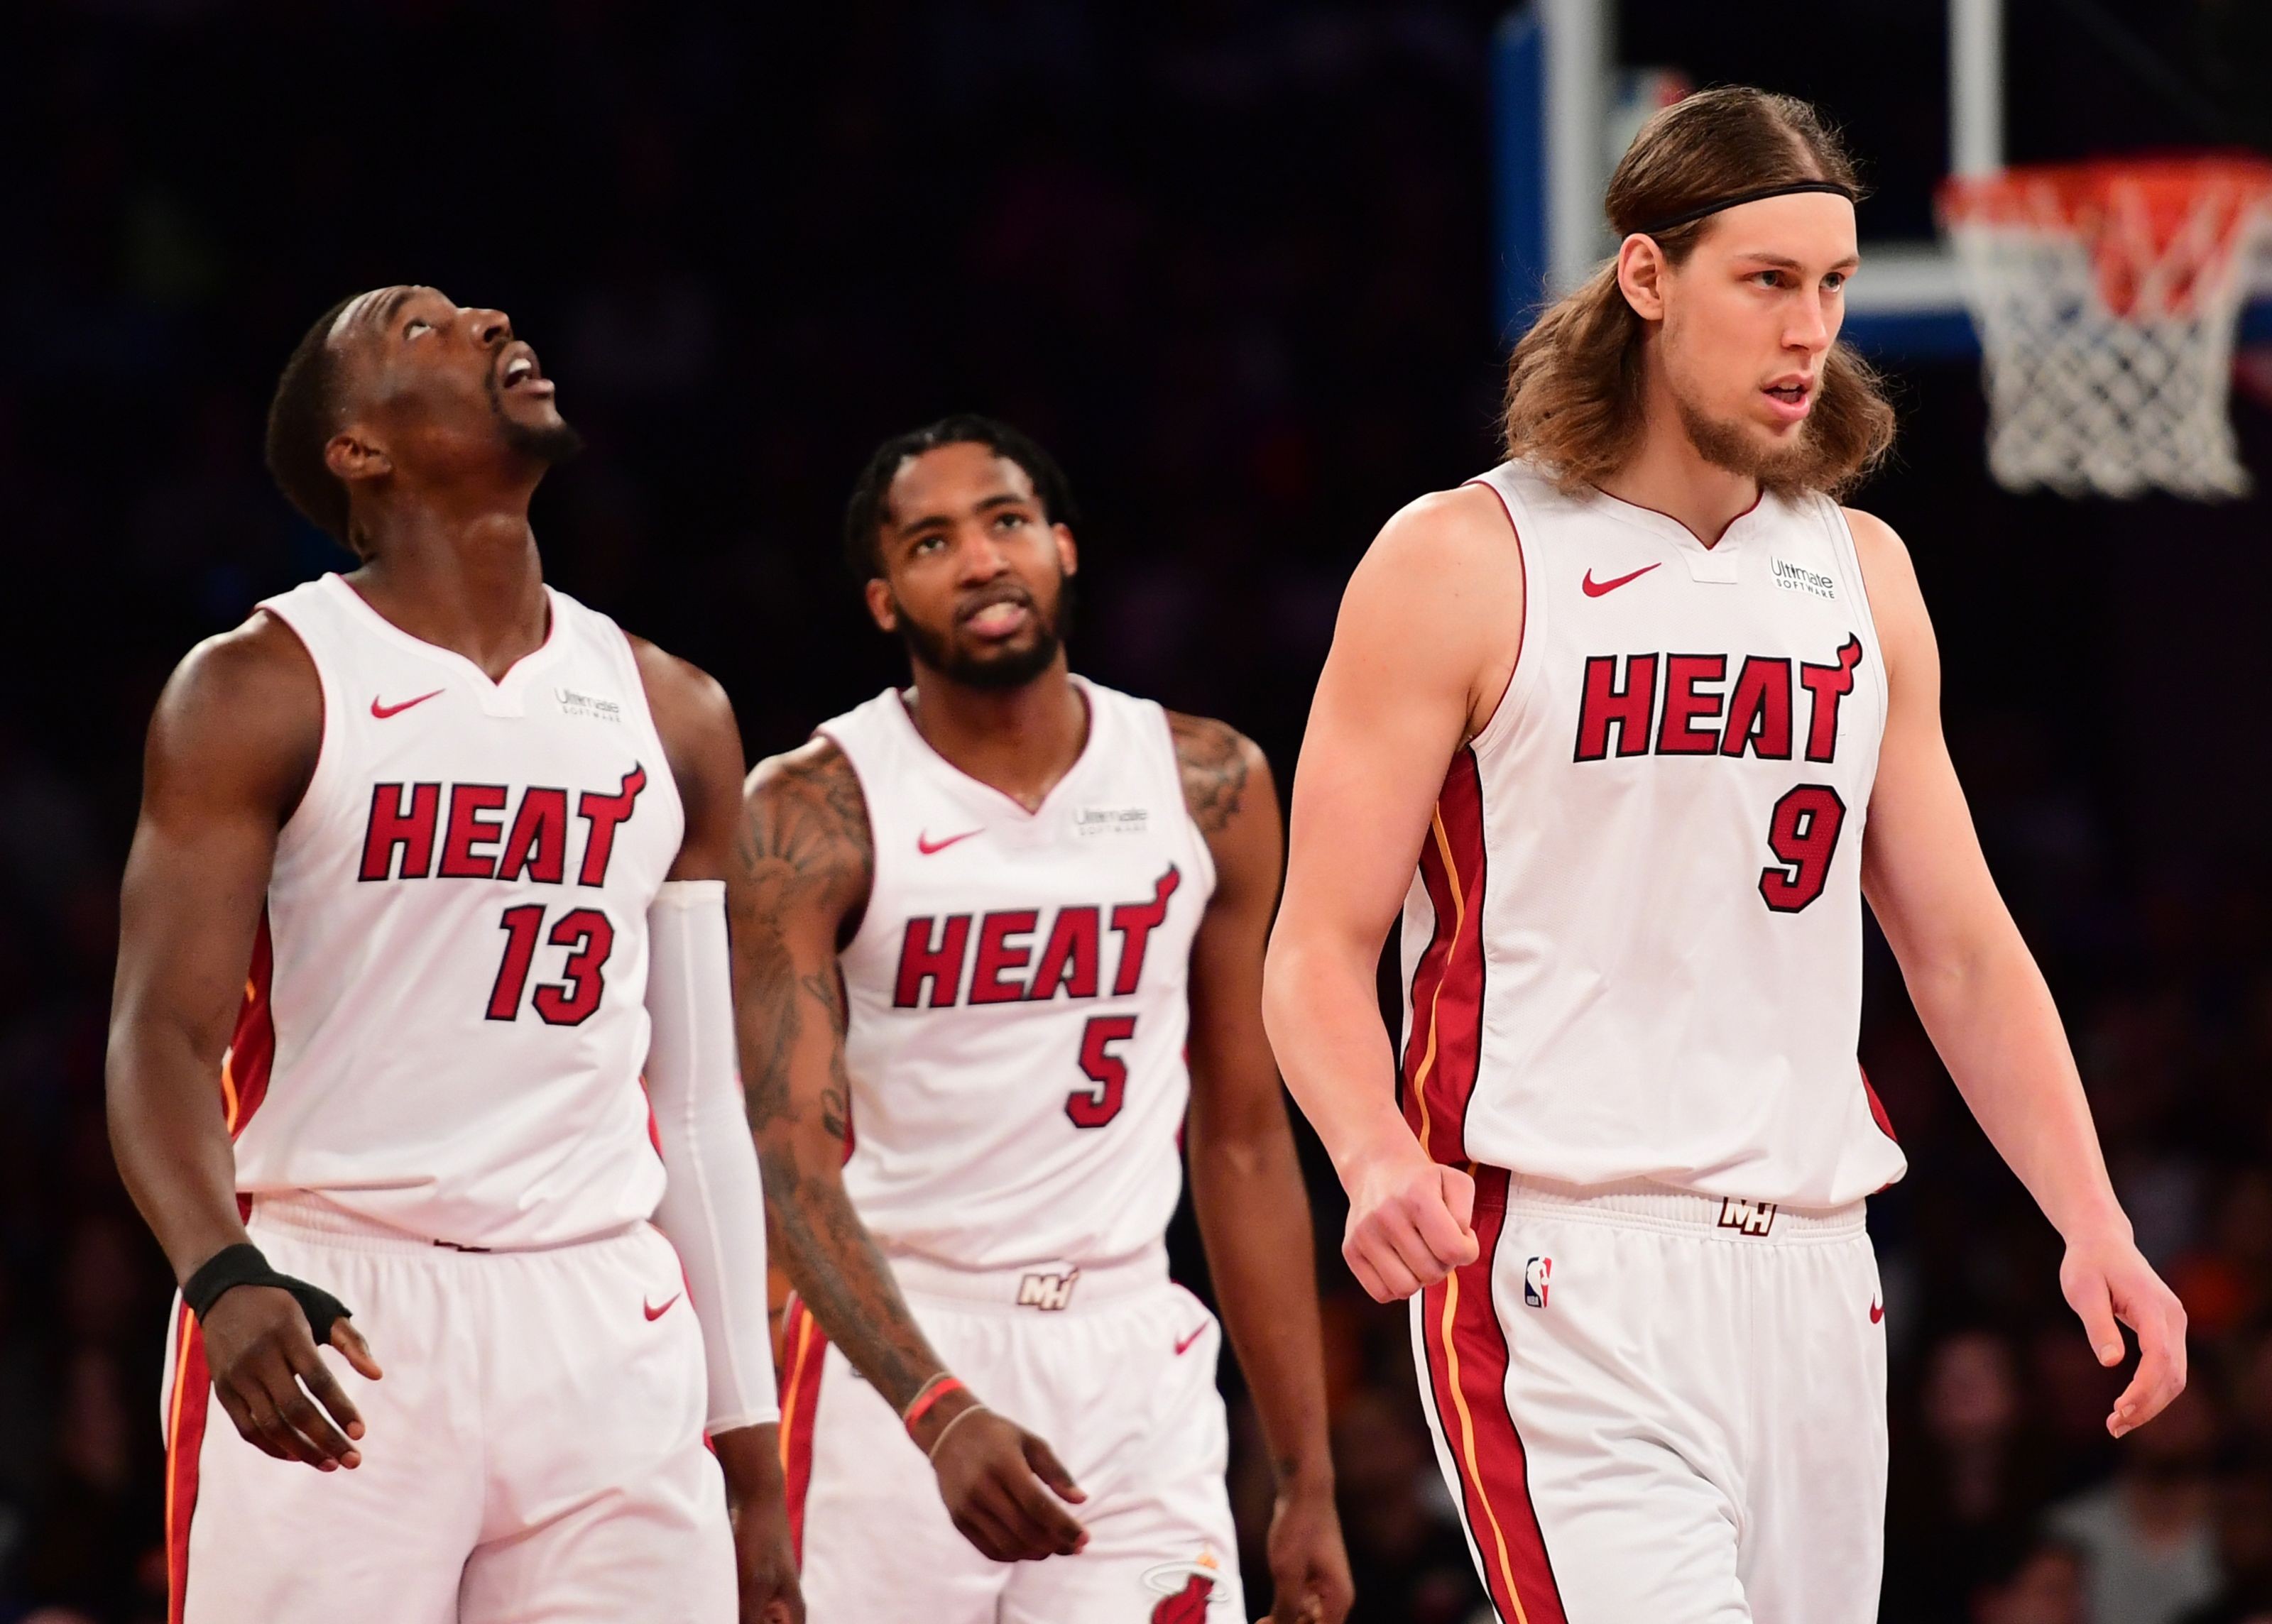 Miami Heat An indepth 20192020 Season Preview of the team